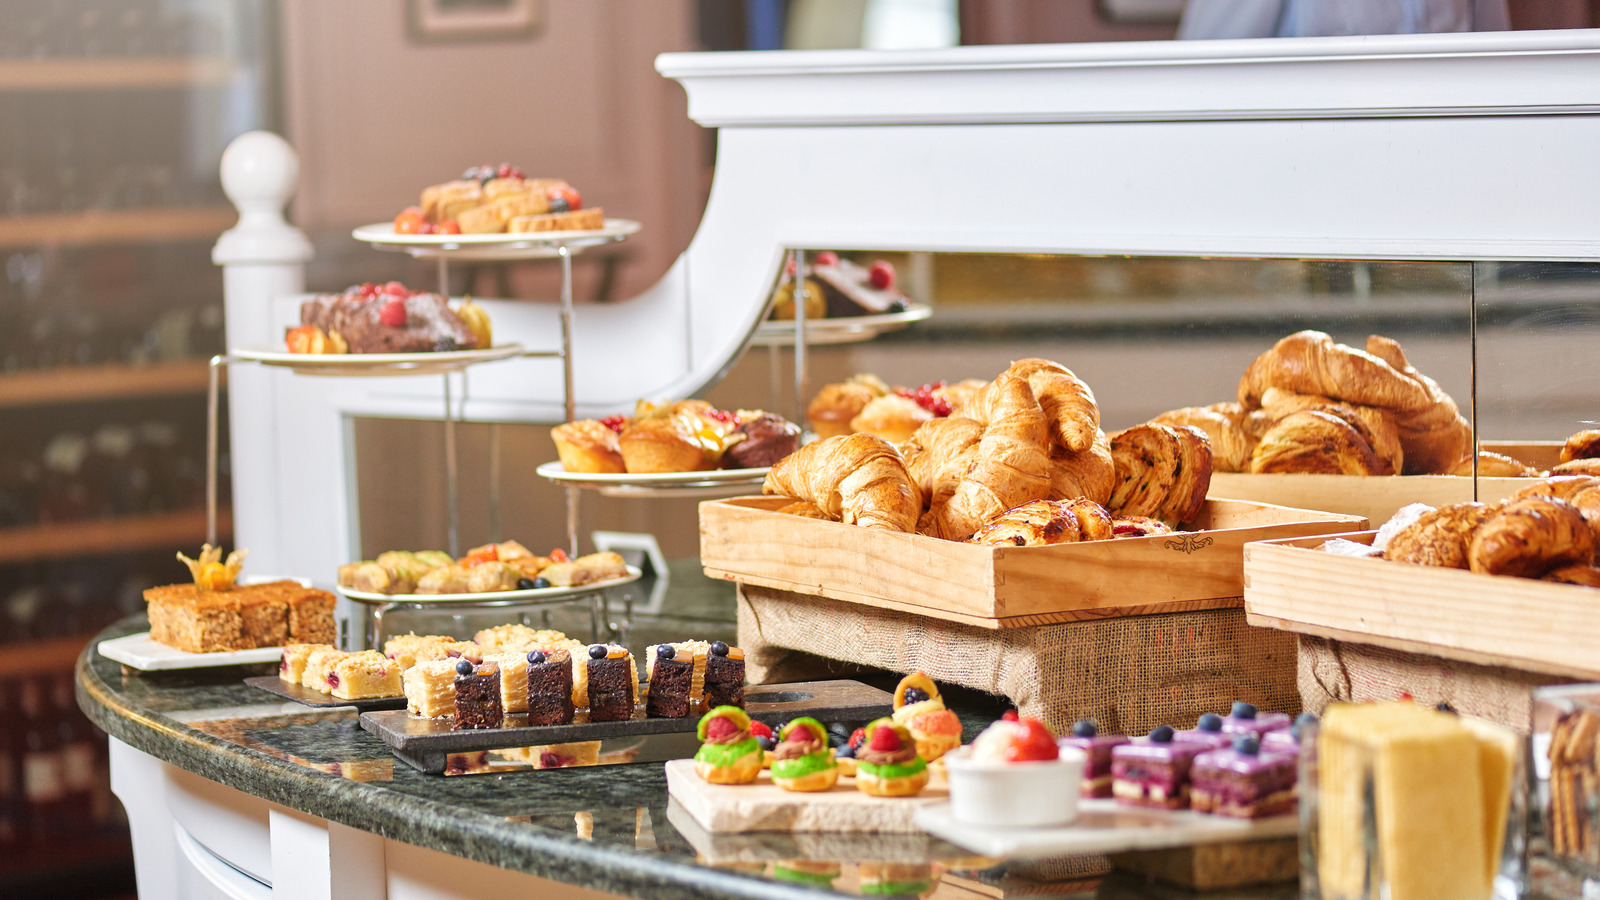 12 Hotel Breakfast Buffets Ranked From Worst To Best